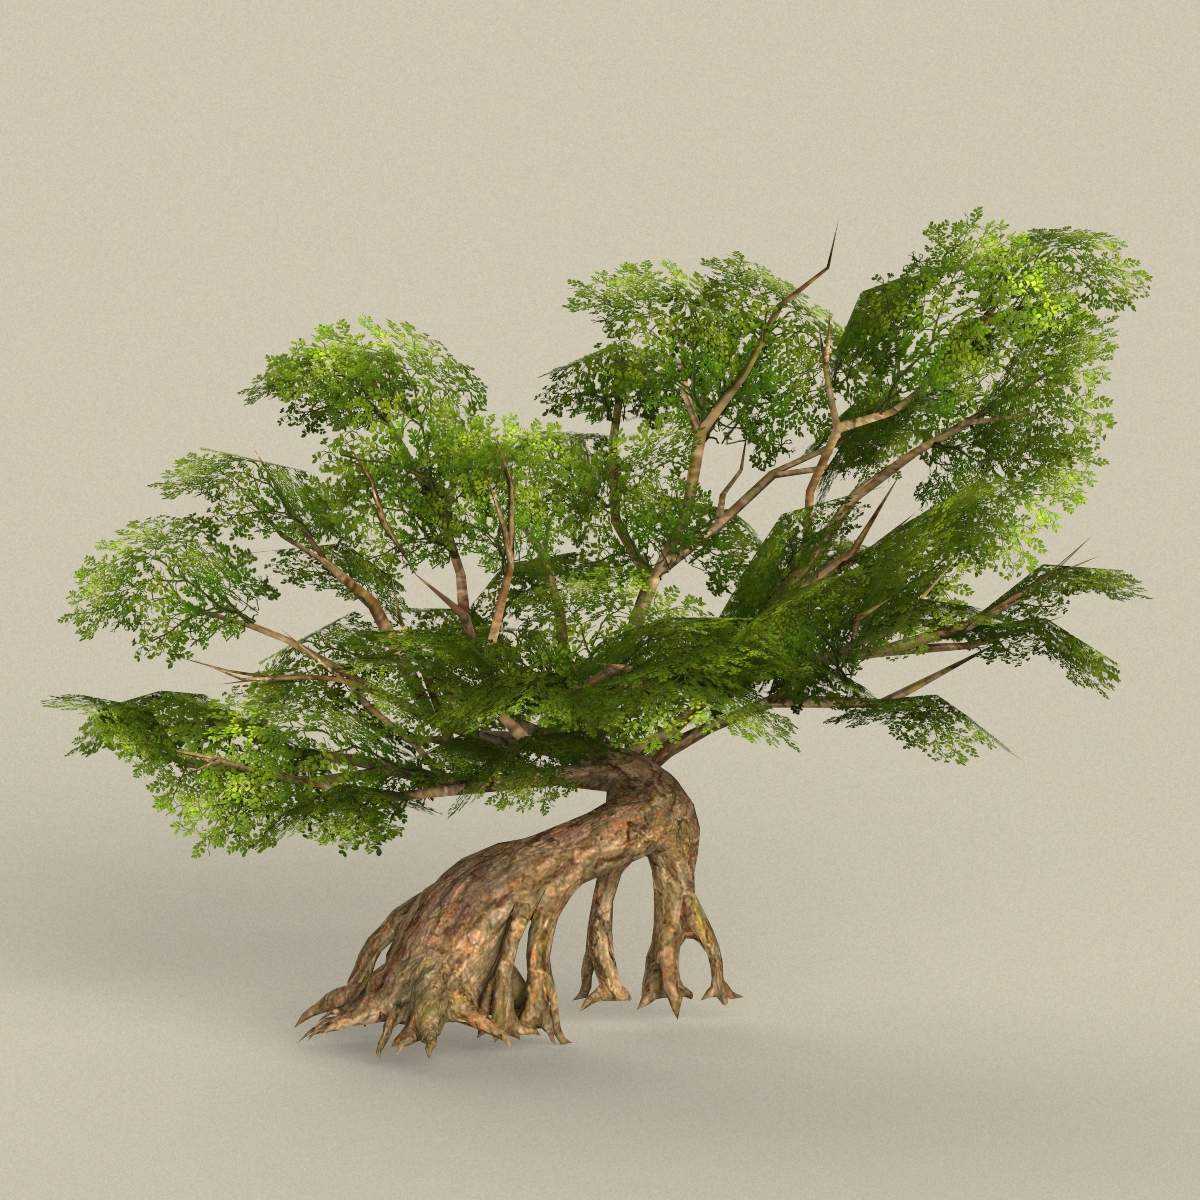 Sketchup plants, trees, and shrubs archive
sketchup plants, trees, and shrubs archive